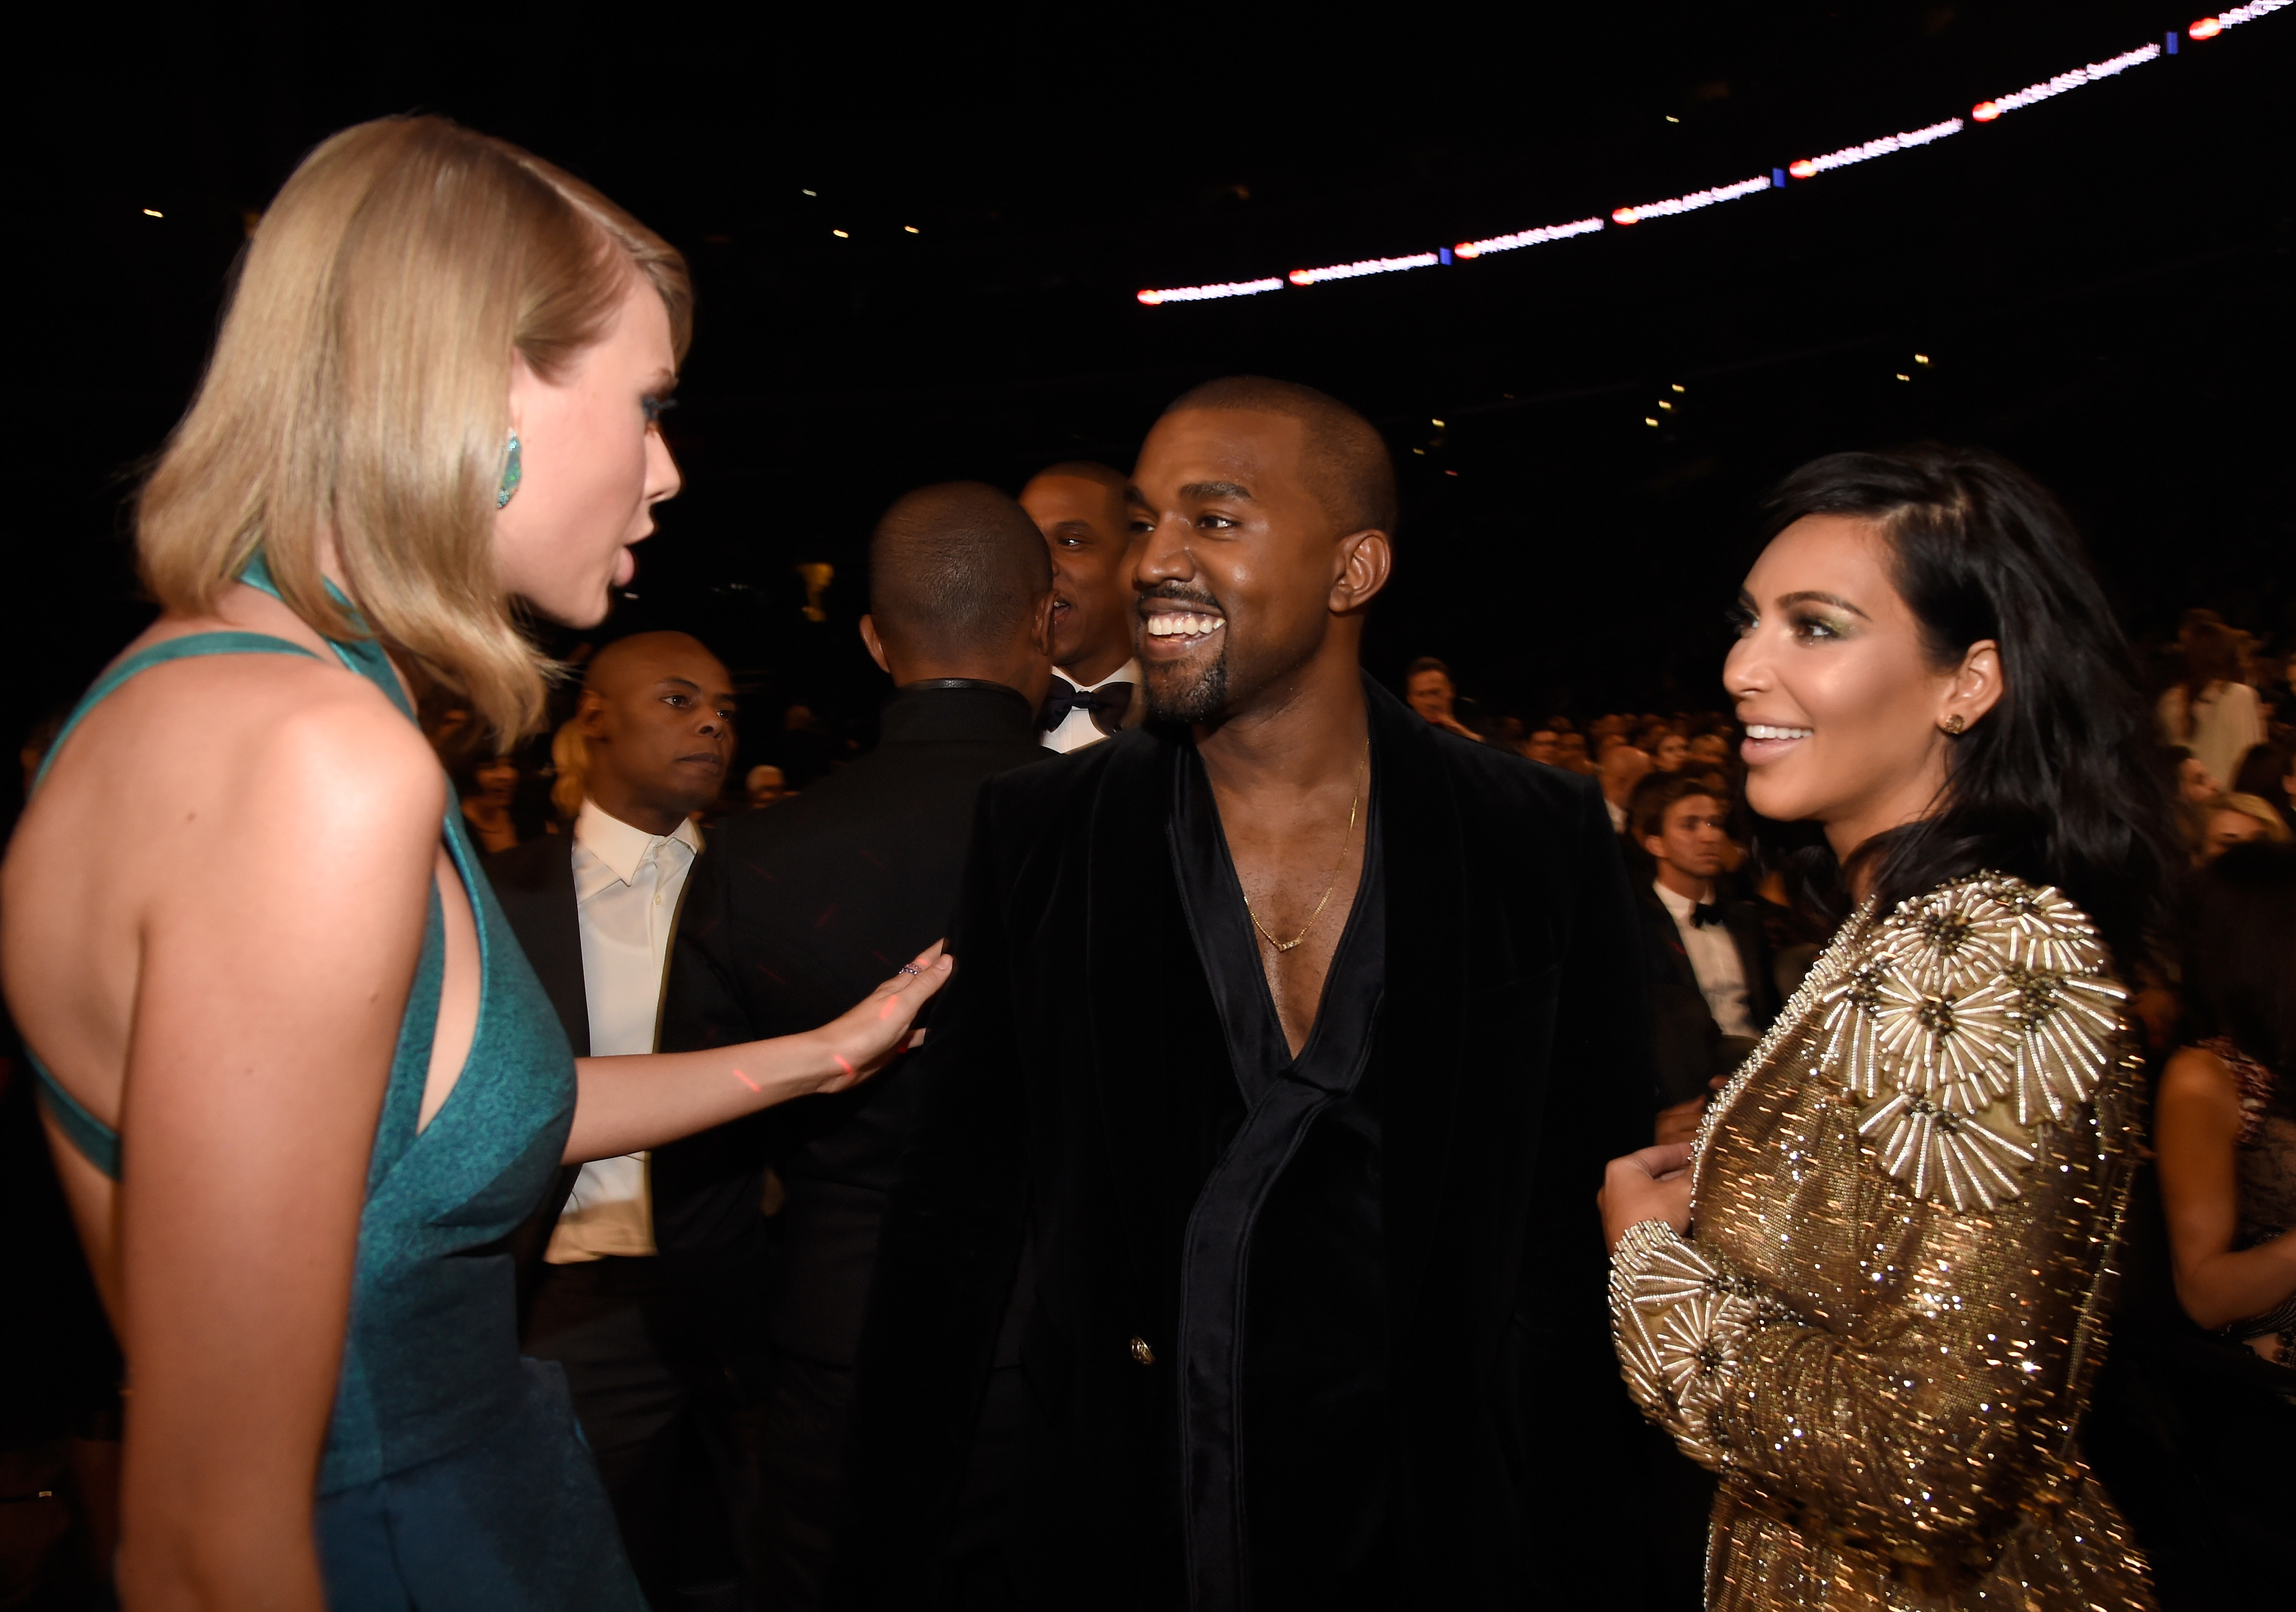 Taylor Swift in a teal dress speaks to Kanye West, wearing a black jacket, and Kim Kardashian in a gold sequined dress